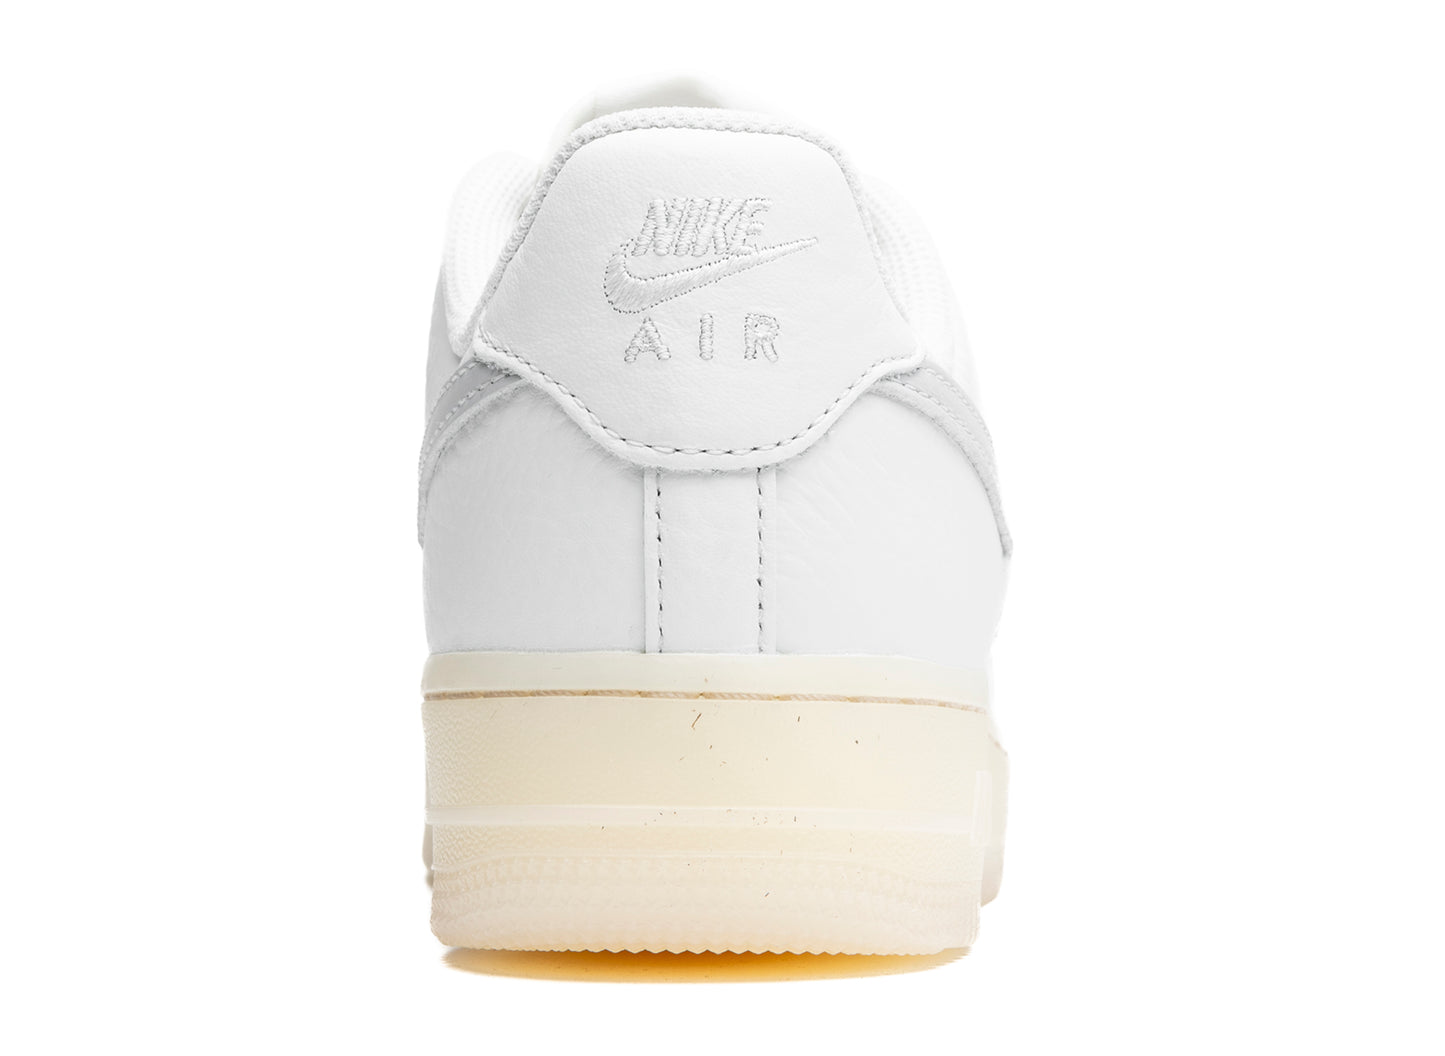 Women's Nike Air Force 1 07 'Starry Night'